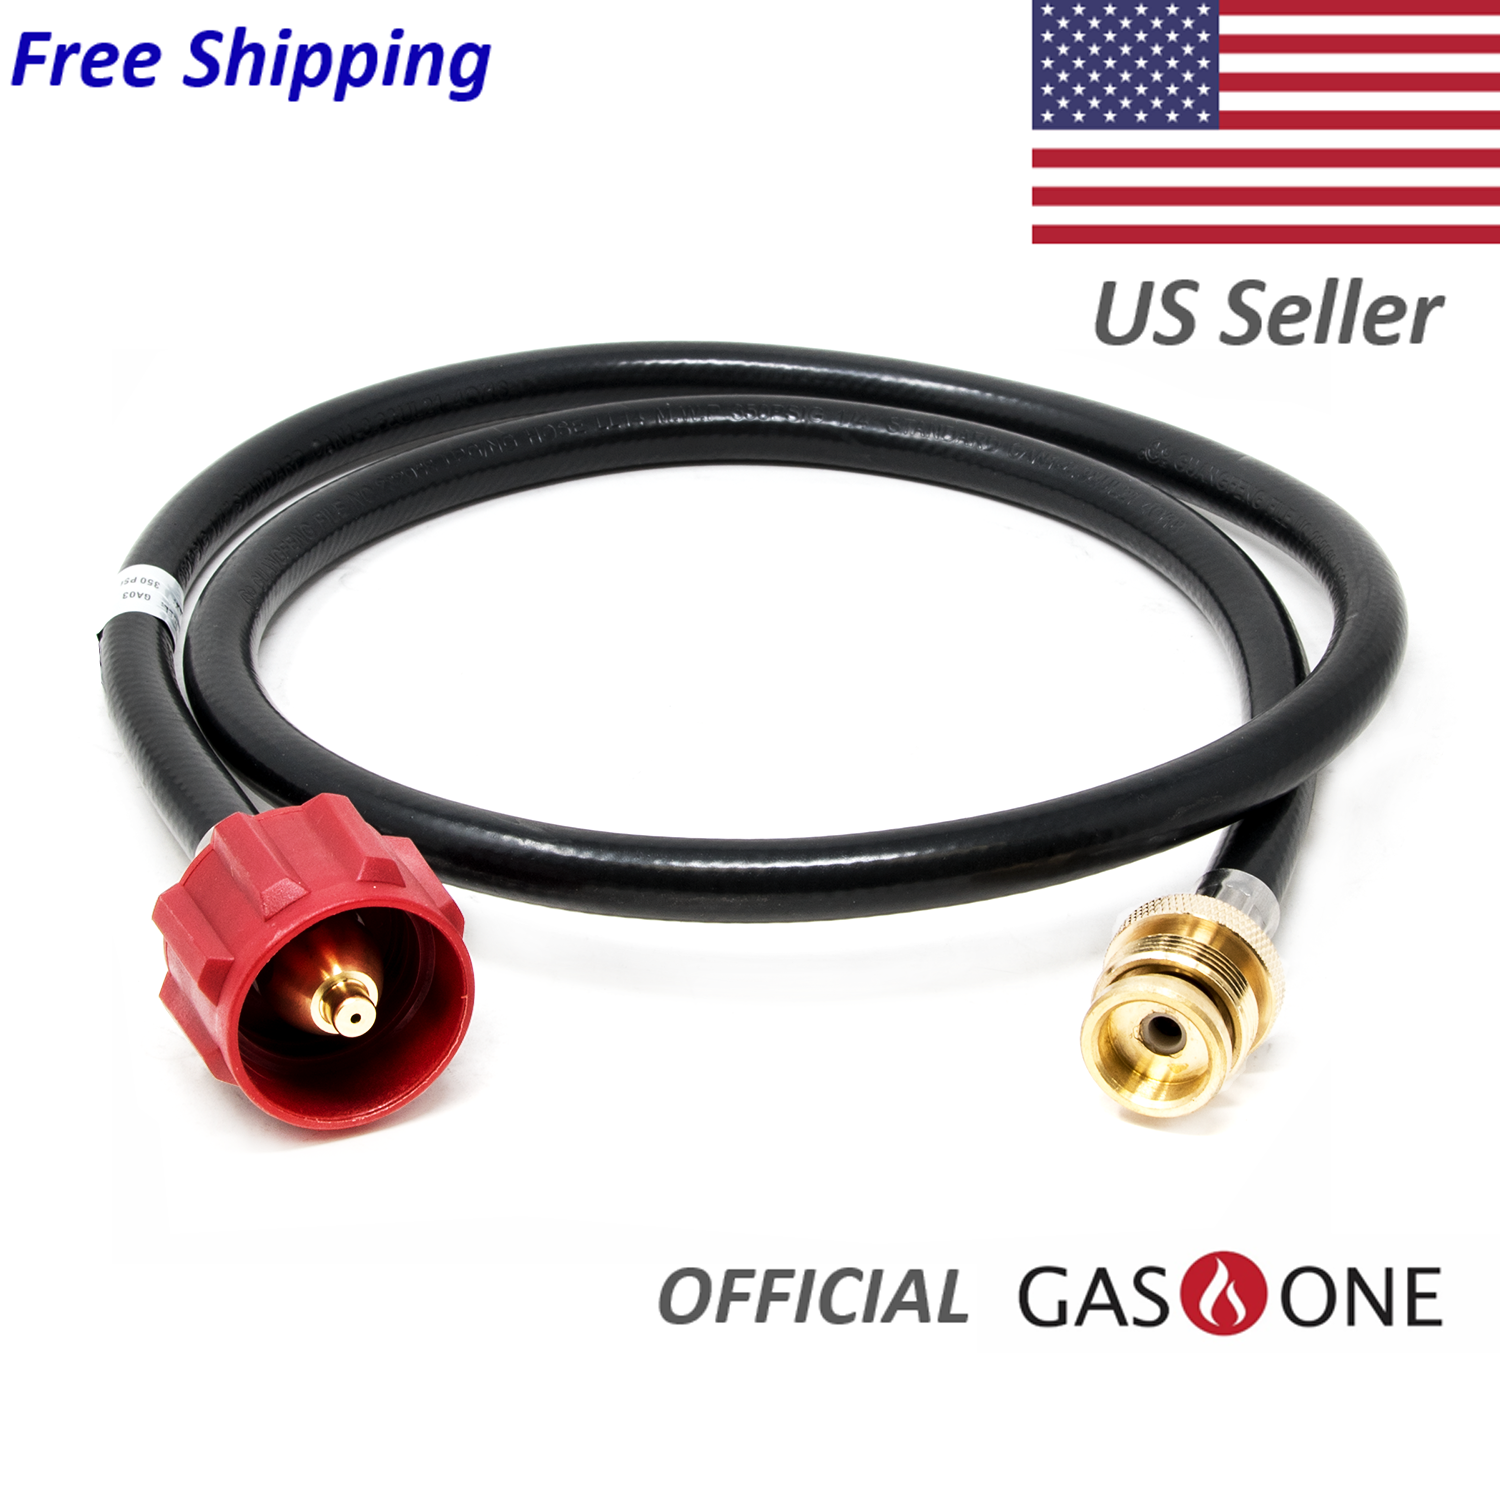 Gas One Propane Hose Adapter 1lb To 20 Lb Converter 4ft